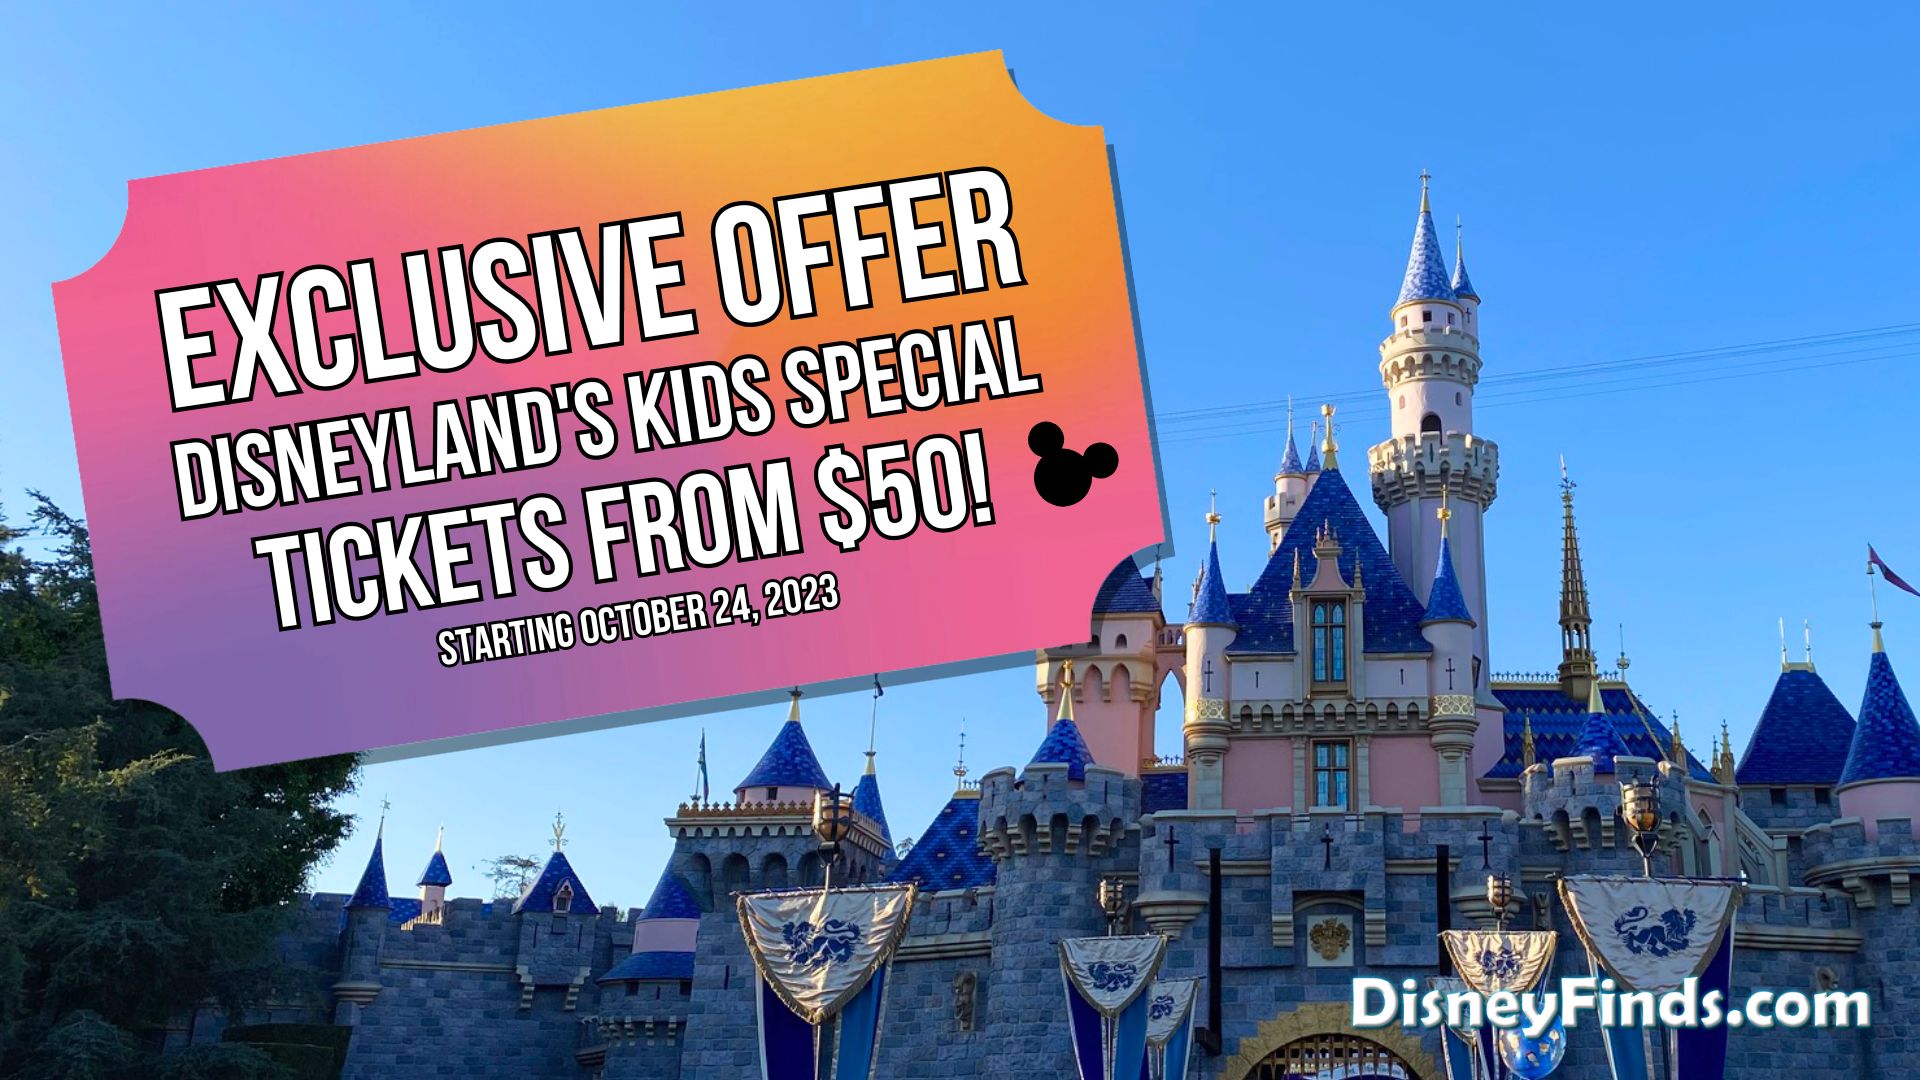 Exclusive Offer: Disneyland's Kids' Special Ticket Offer from $50